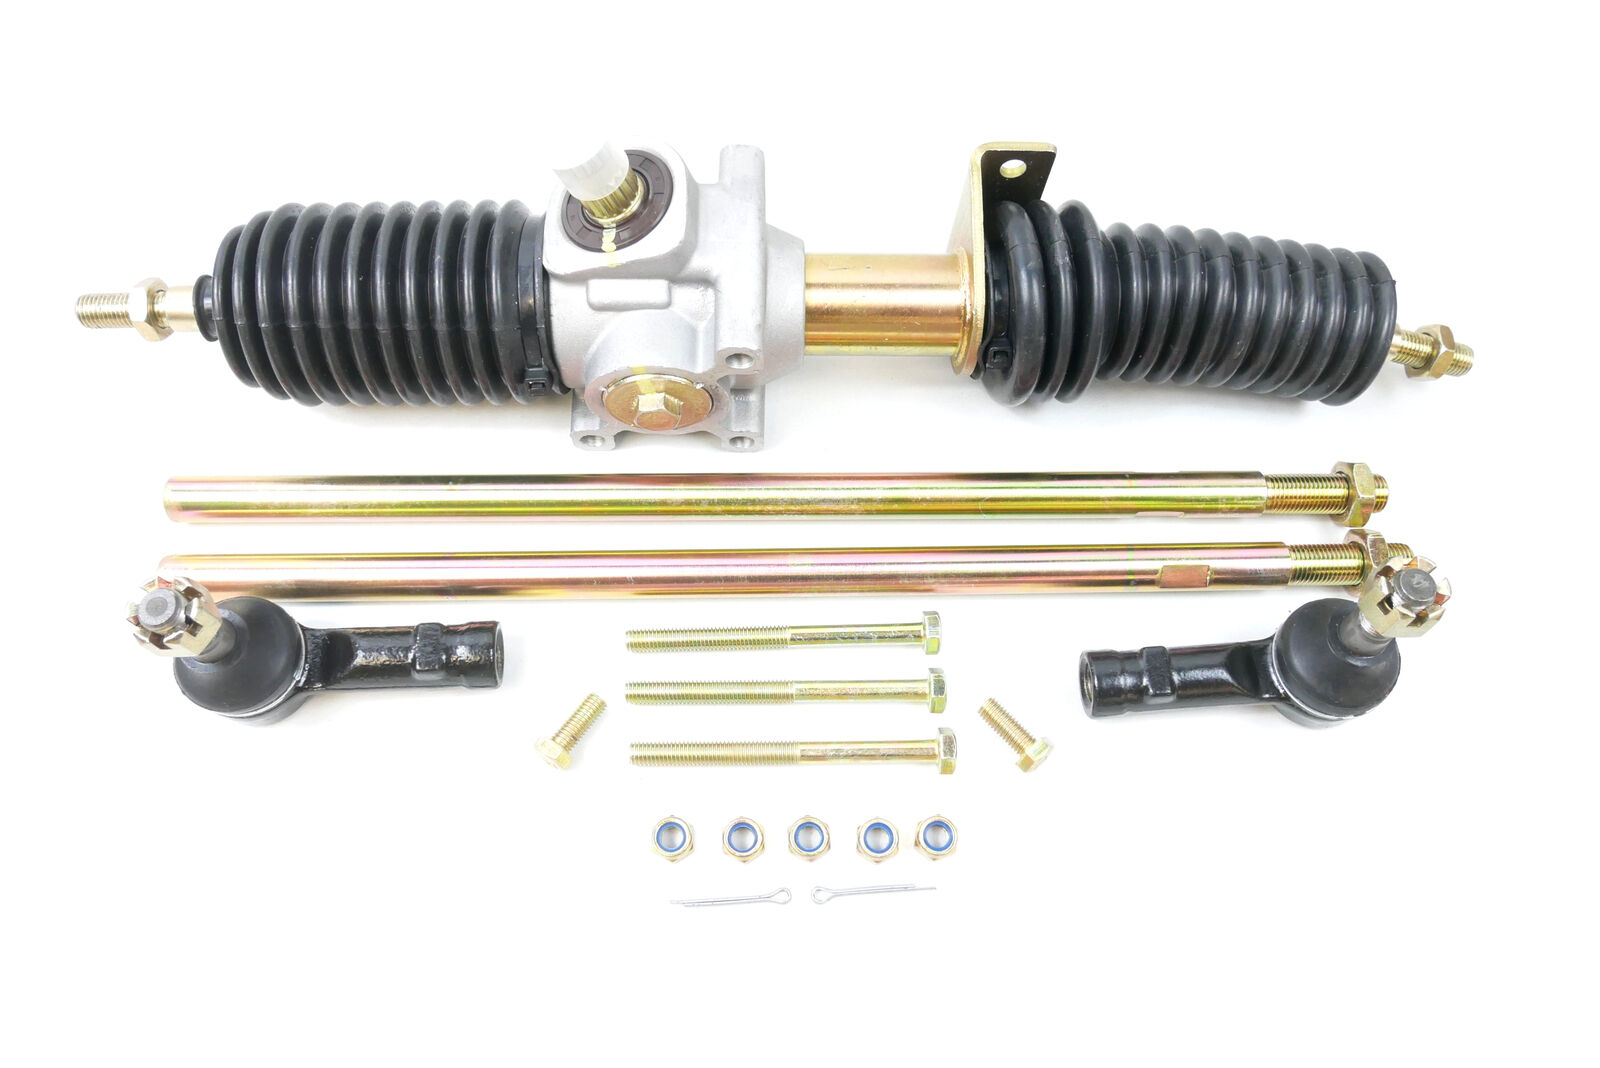 Rack & Pinion Steering Assembly for Polaris RZR XP & XP4 1000, 1824835